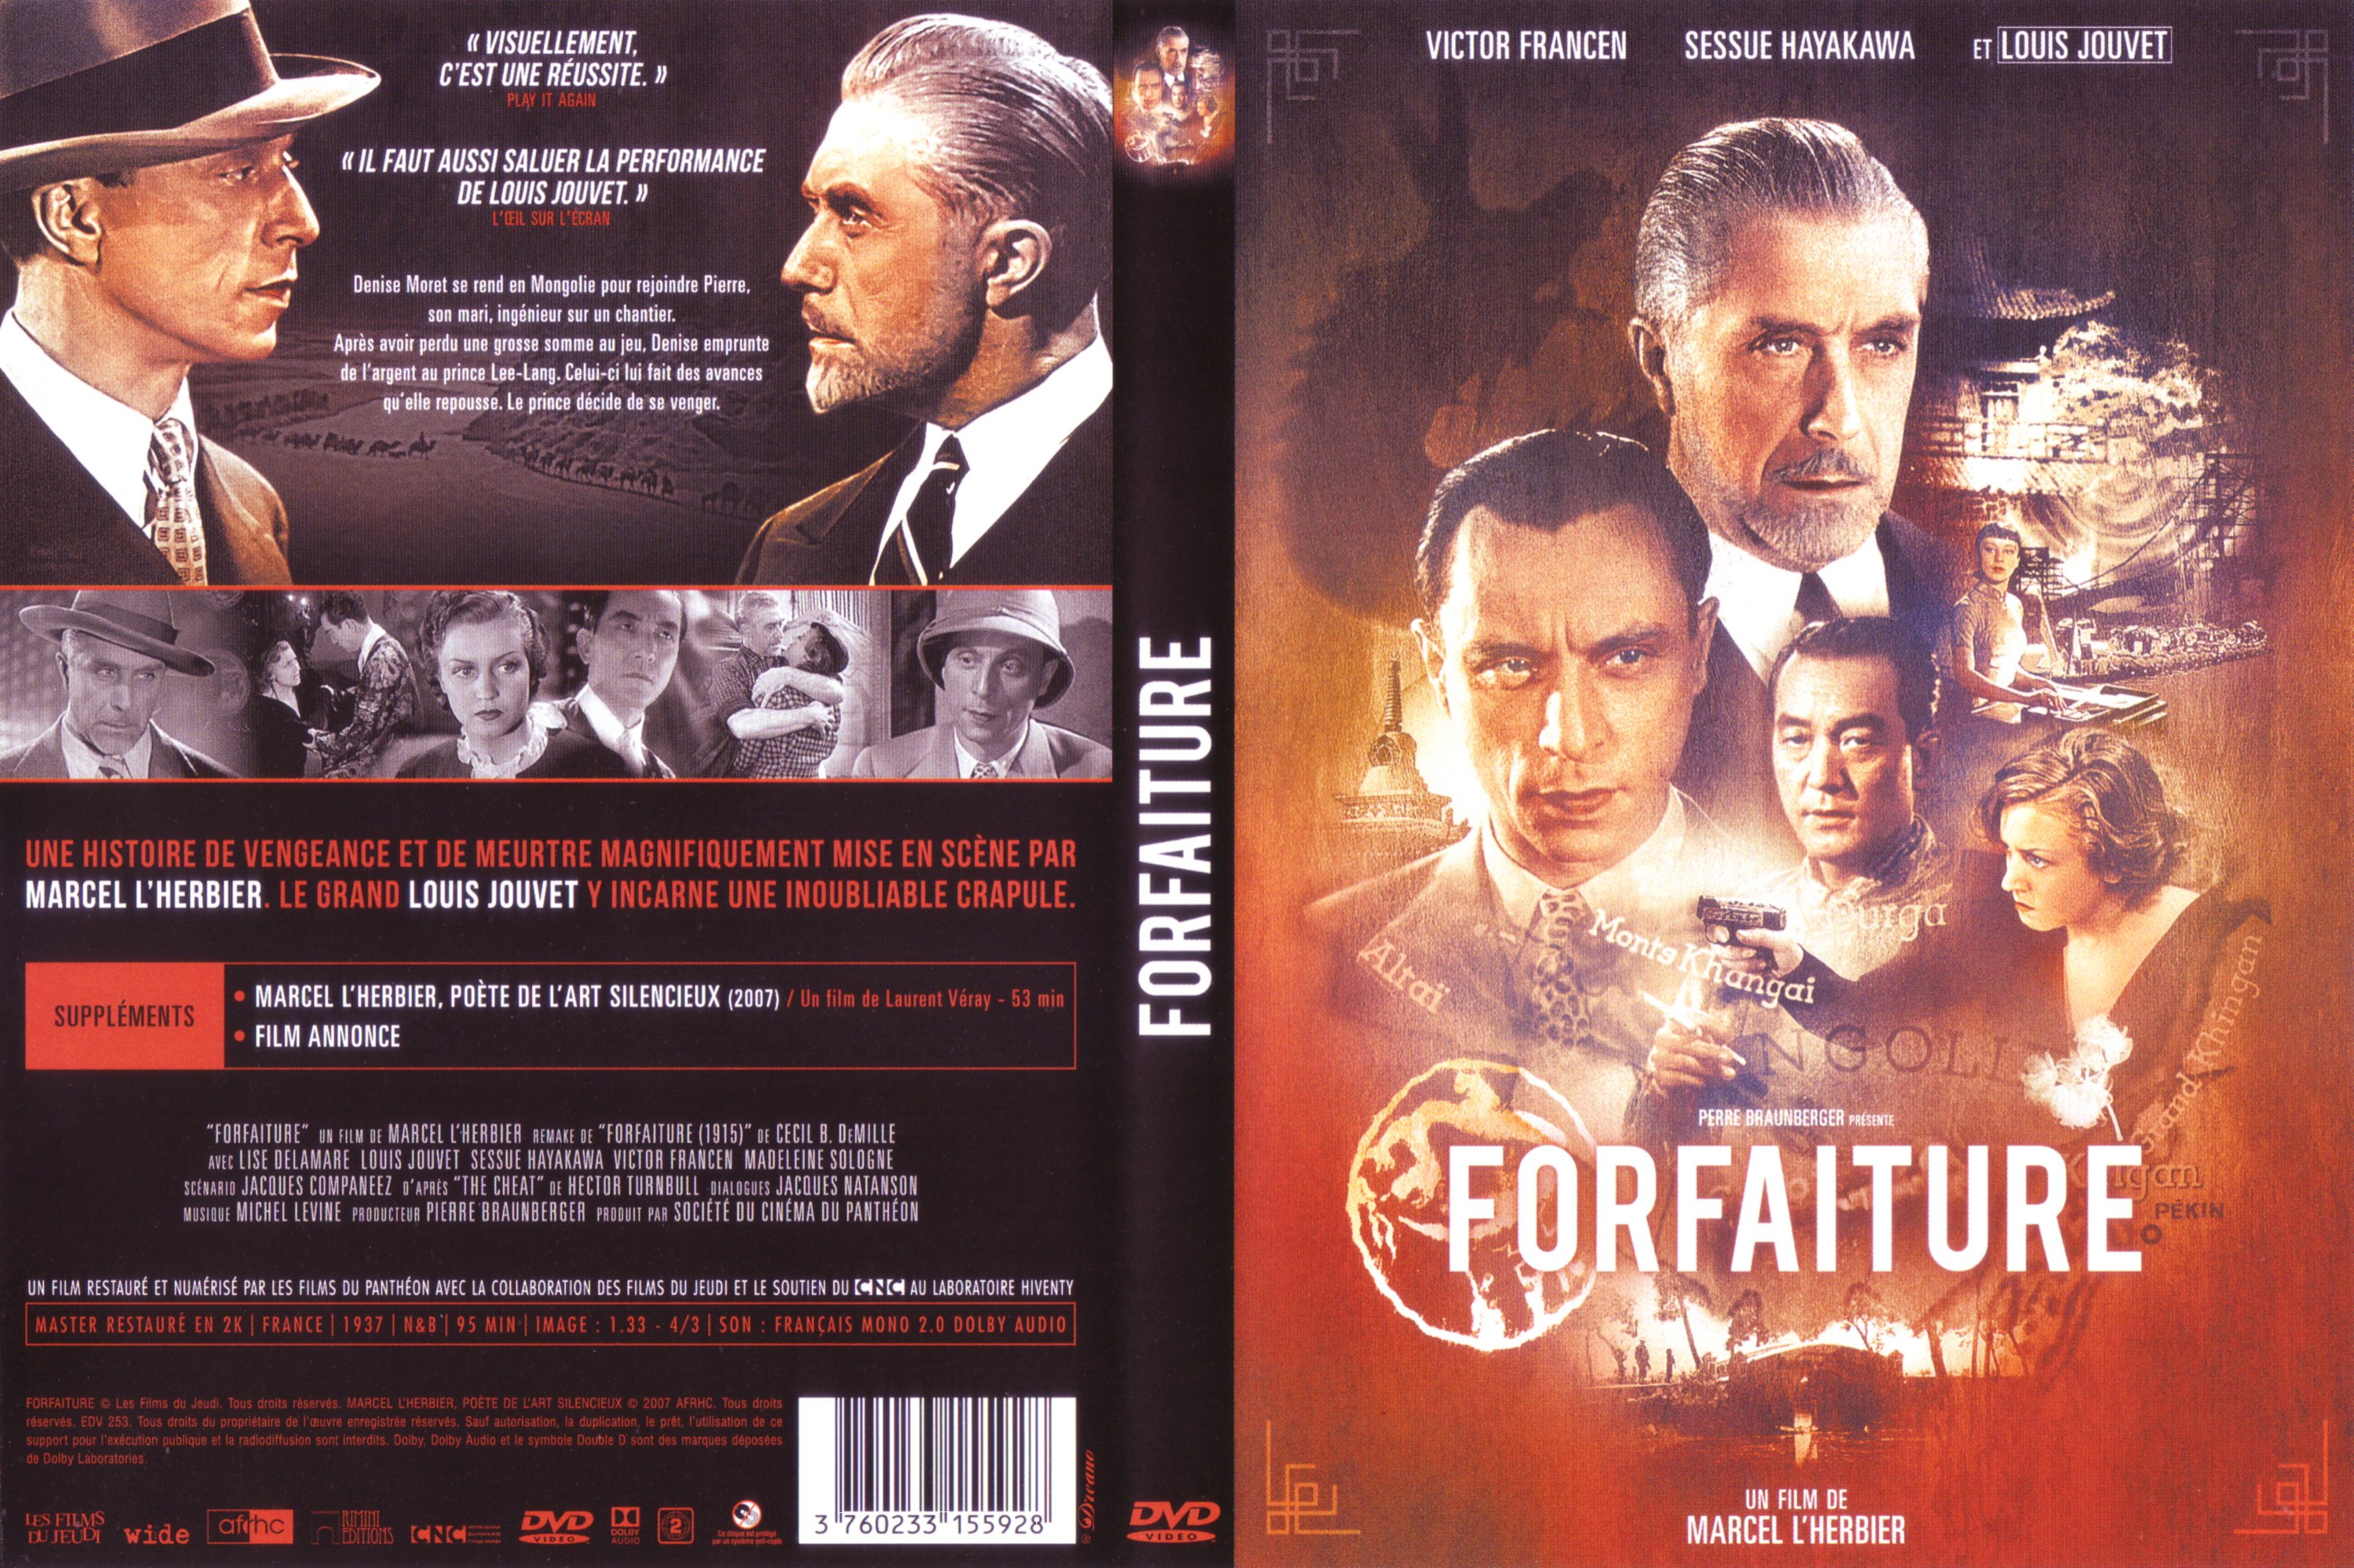 Jaquette DVD Forfaiture (1937)